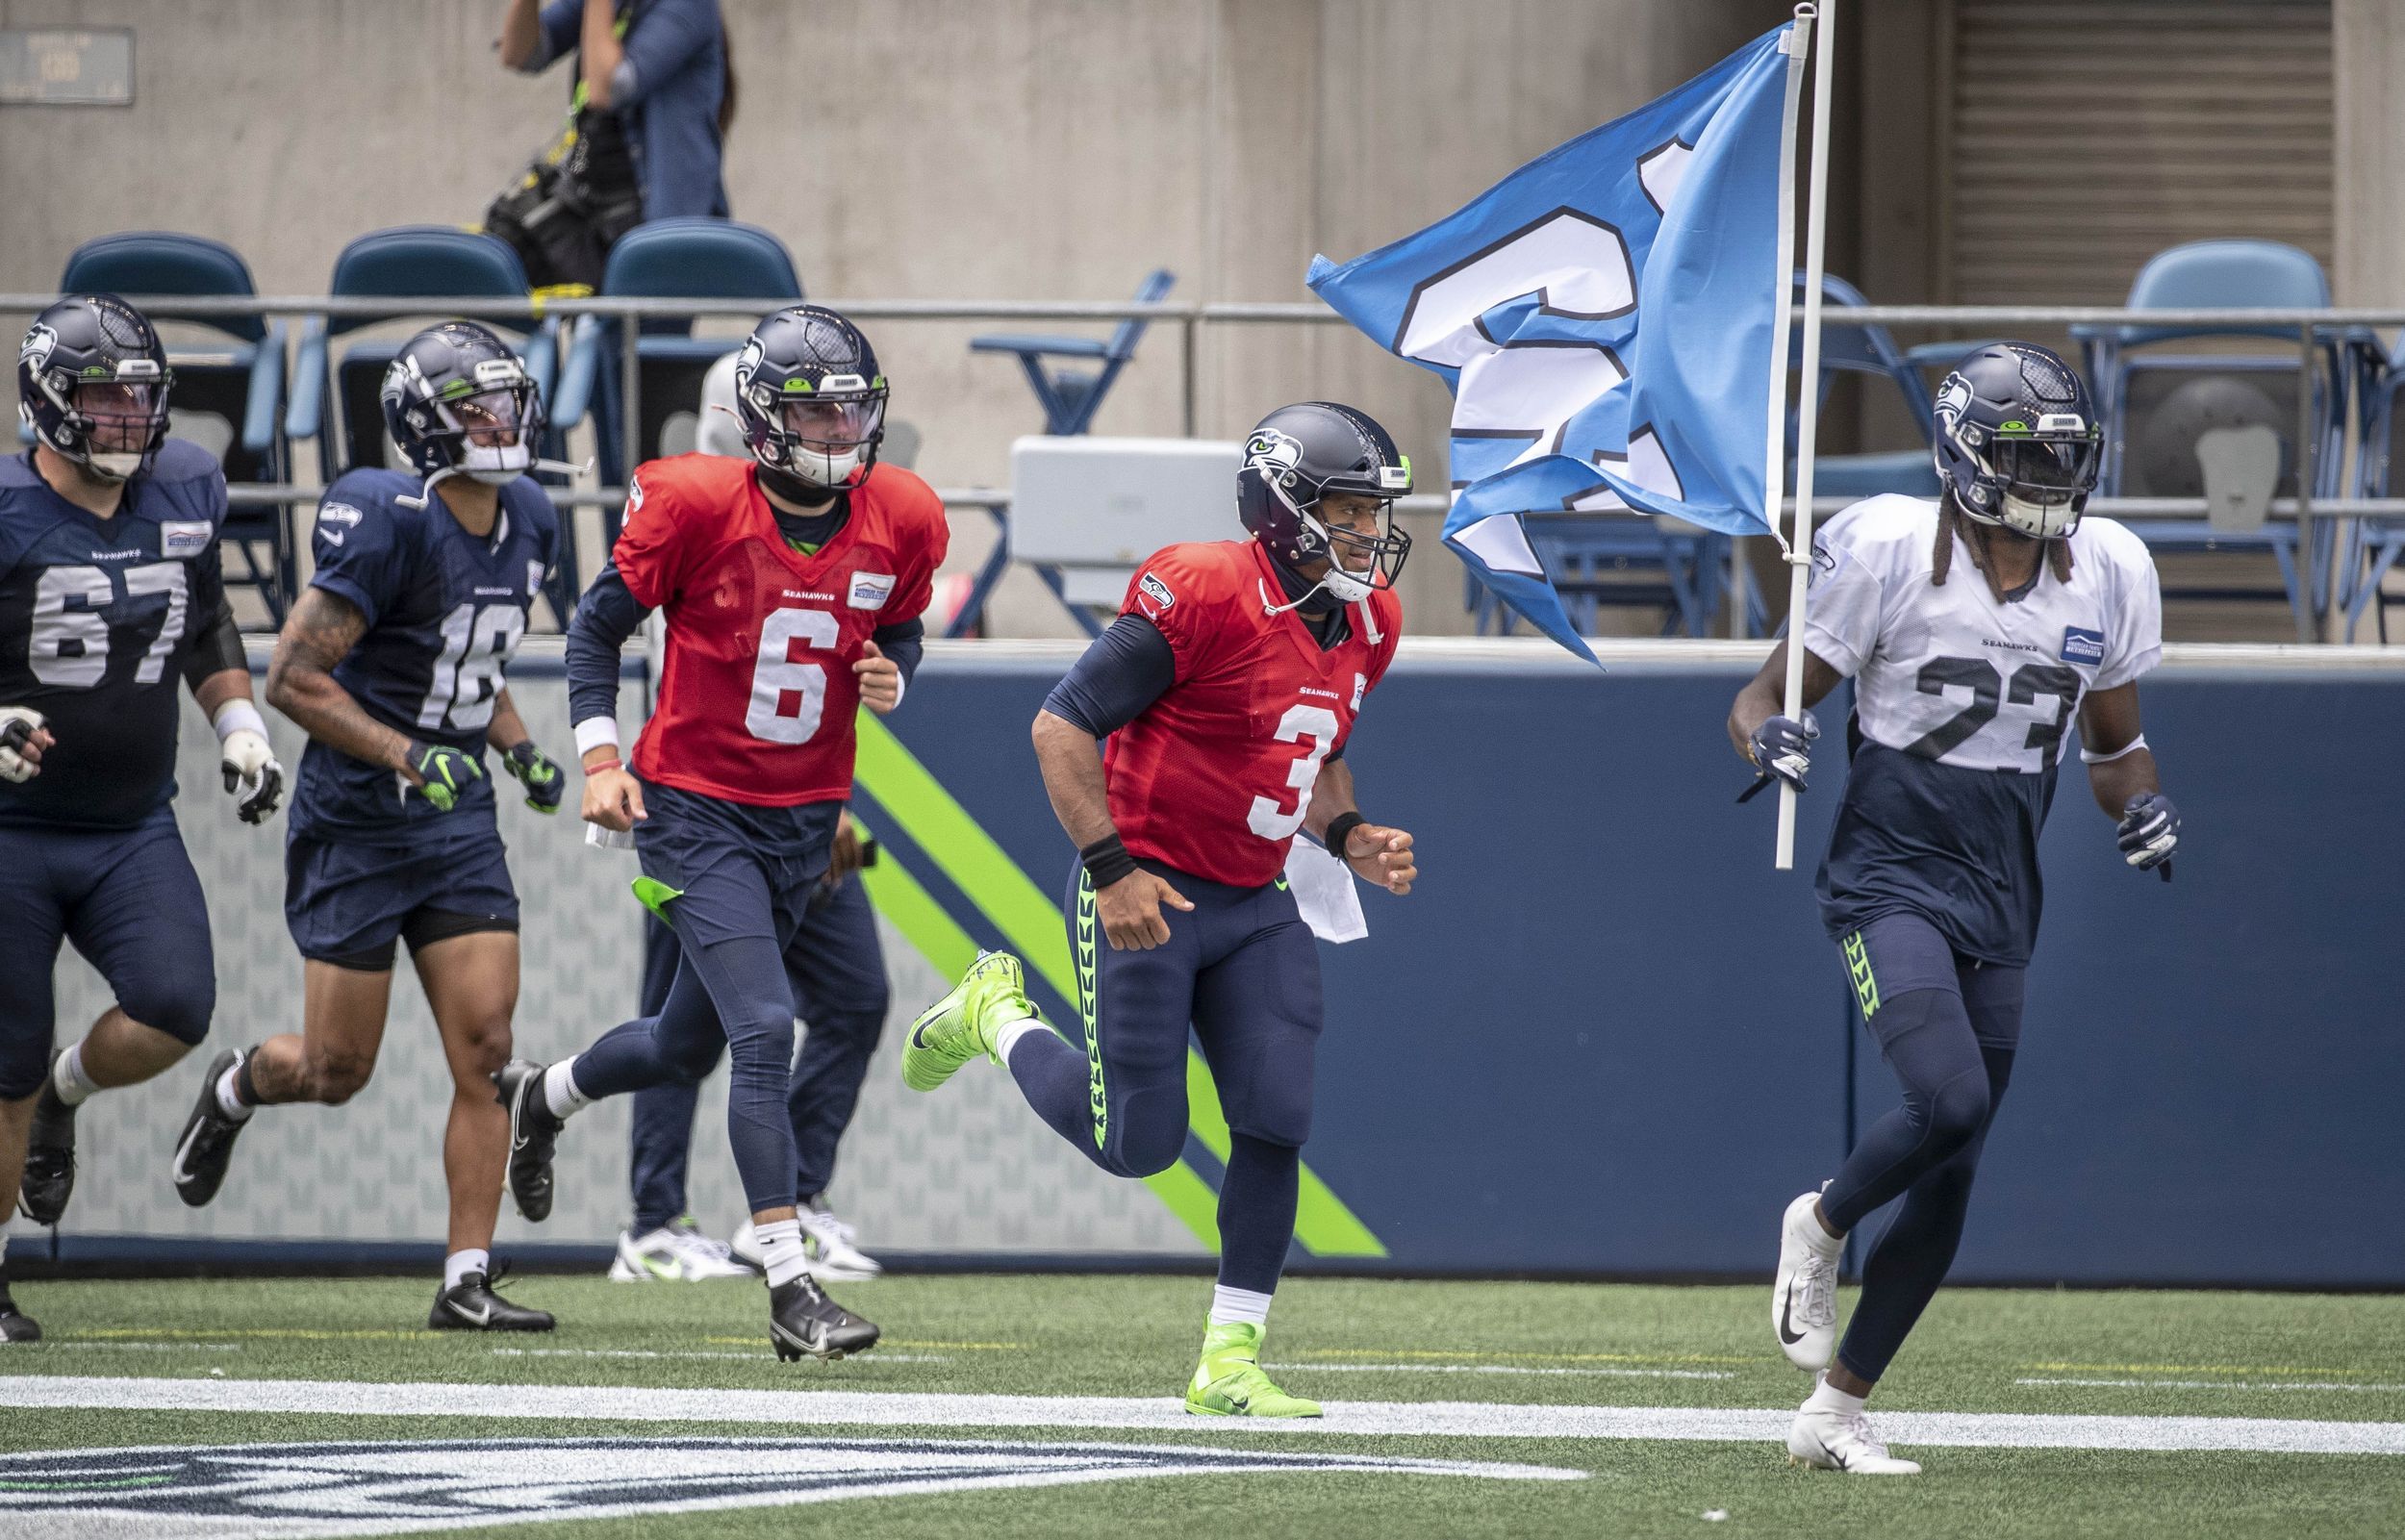 Commentary Mock game gives Seahawks players a taste of homefield